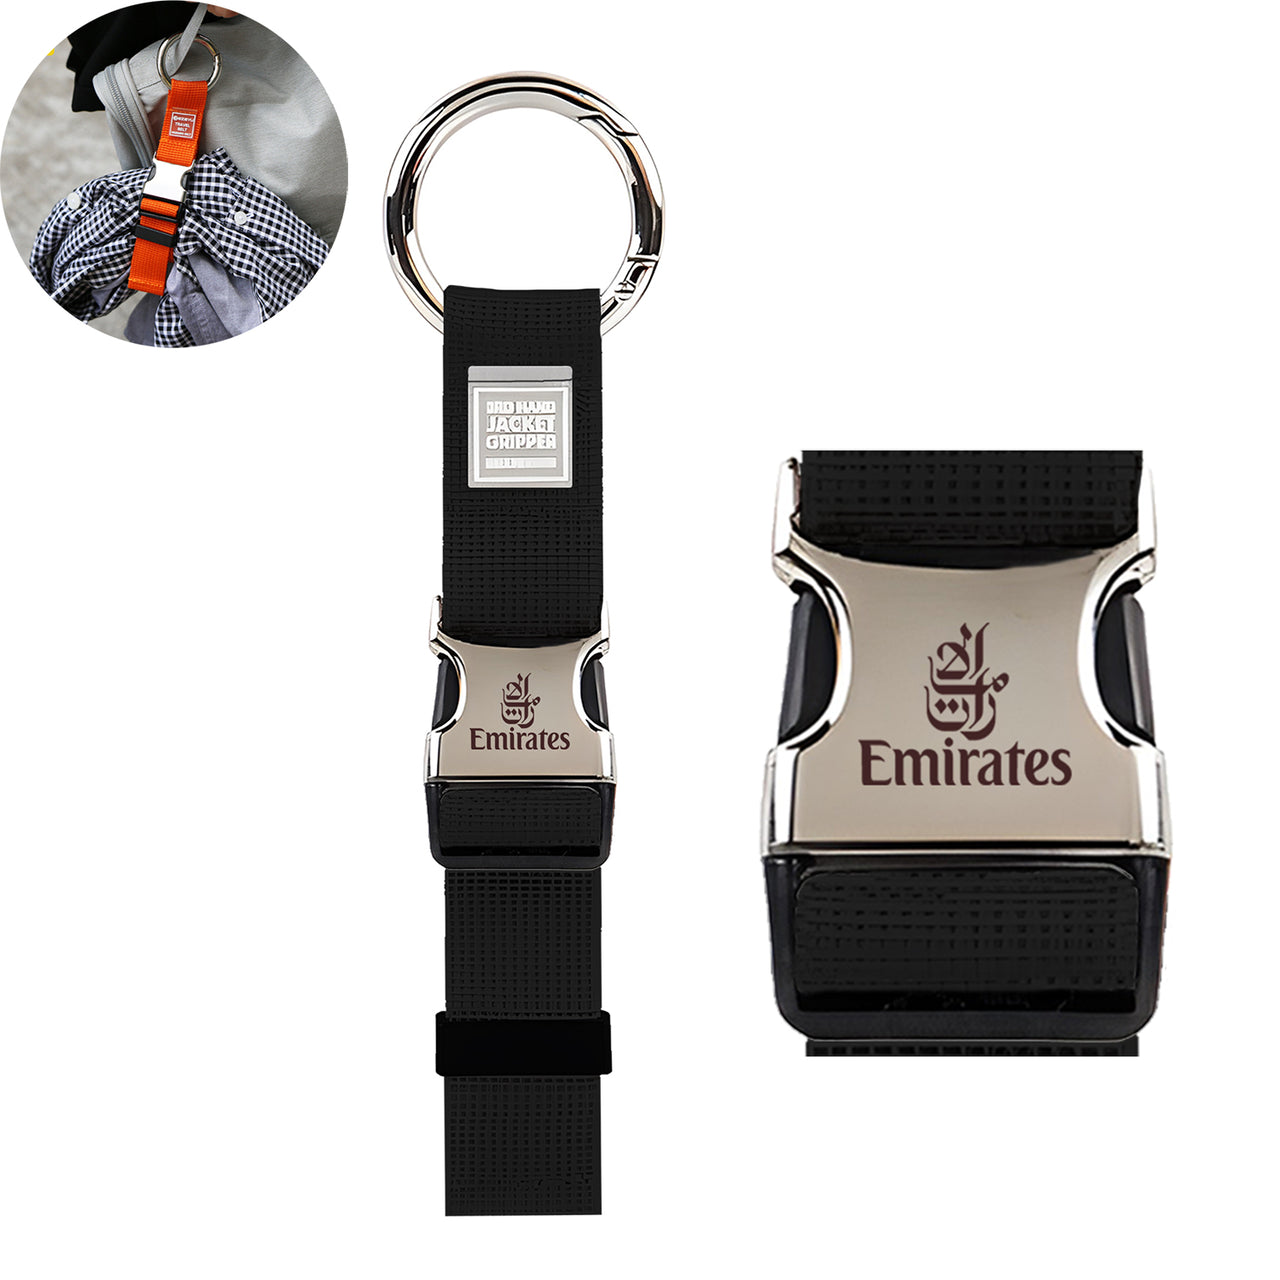 Emirates Airlines Designed Portable Luggage Strap Jacket Gripper